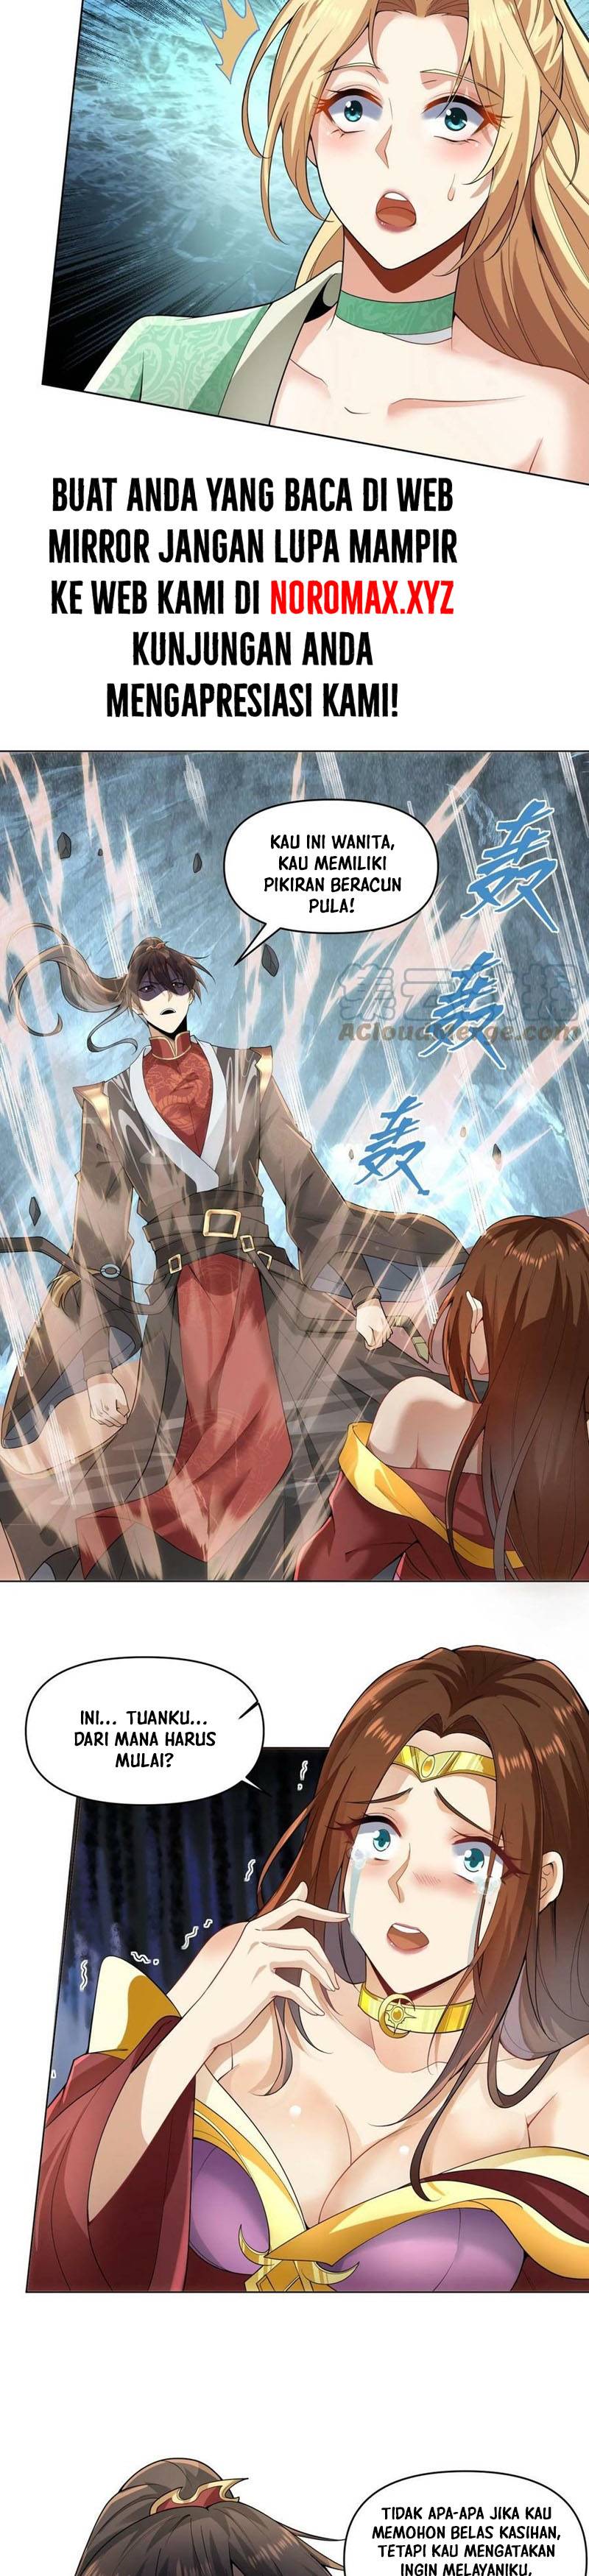 It’s Over! The Queen’s Soft Rice Husband is Actually Invincible Chapter 13 Bahasa Indonesia